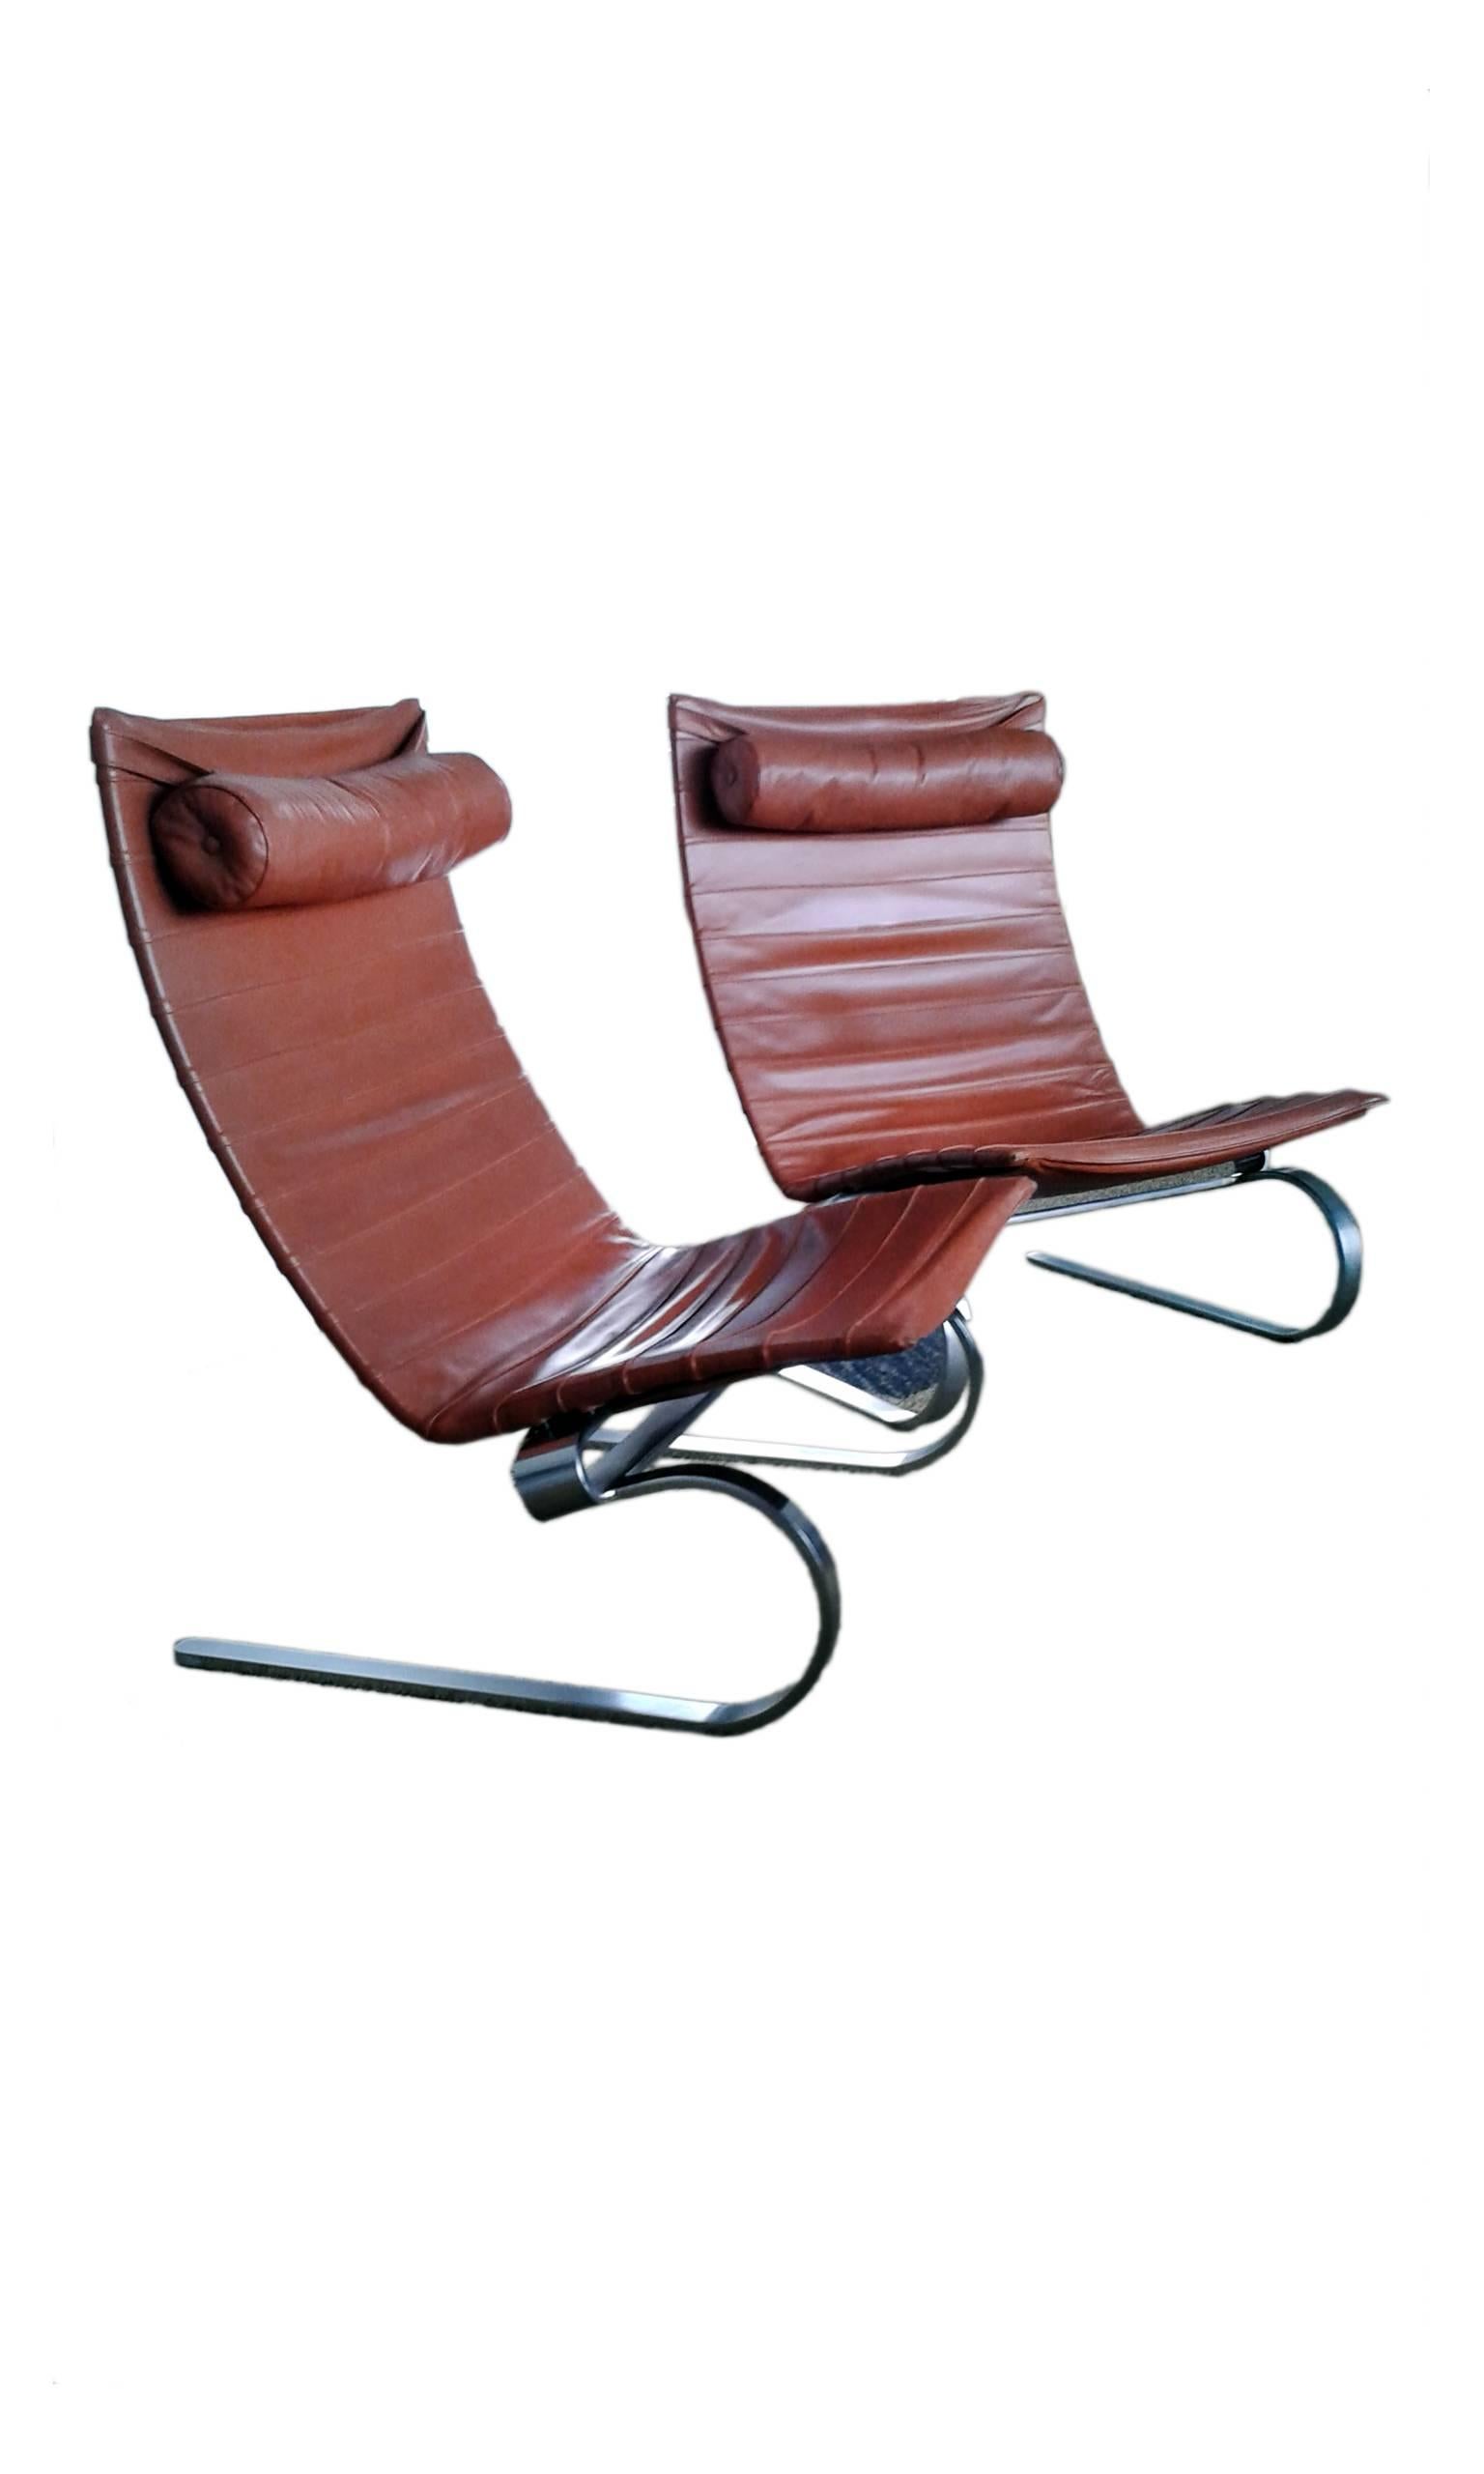 Offerd by Zitzo, Amsterdam: Pair of PK 20 lounge chair in original leather designed by Danish designer Poul Kjaerholm for E. Kold Christensen, Denmark 1968, original leather, matte chrome-plated steel.

Signed with impressed manufacturer’s mark to